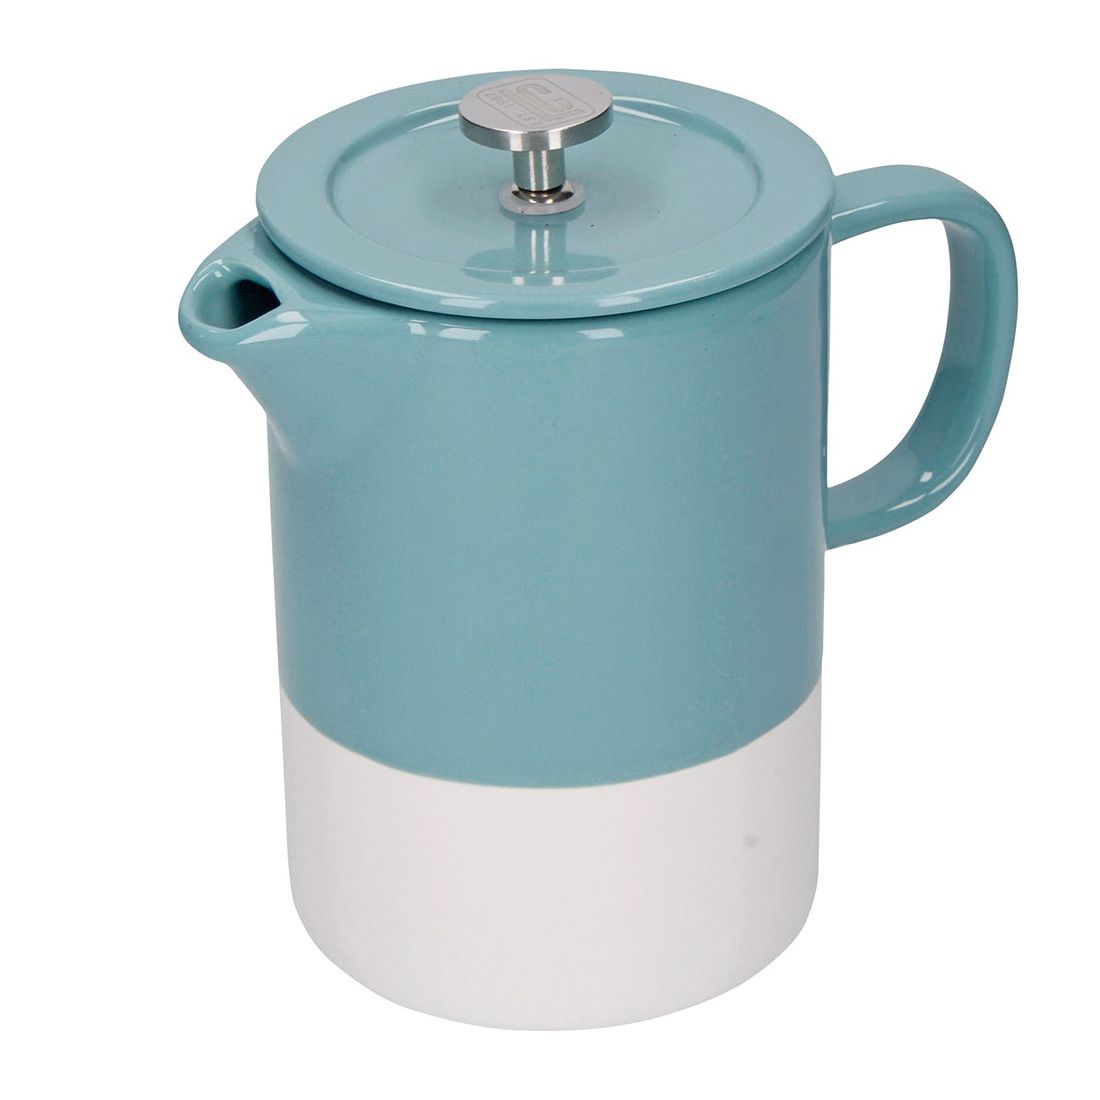 Kitchencraft L.A. Cafetiere Barcelona Retro Blue 6-Cup 850ml Cafetiere